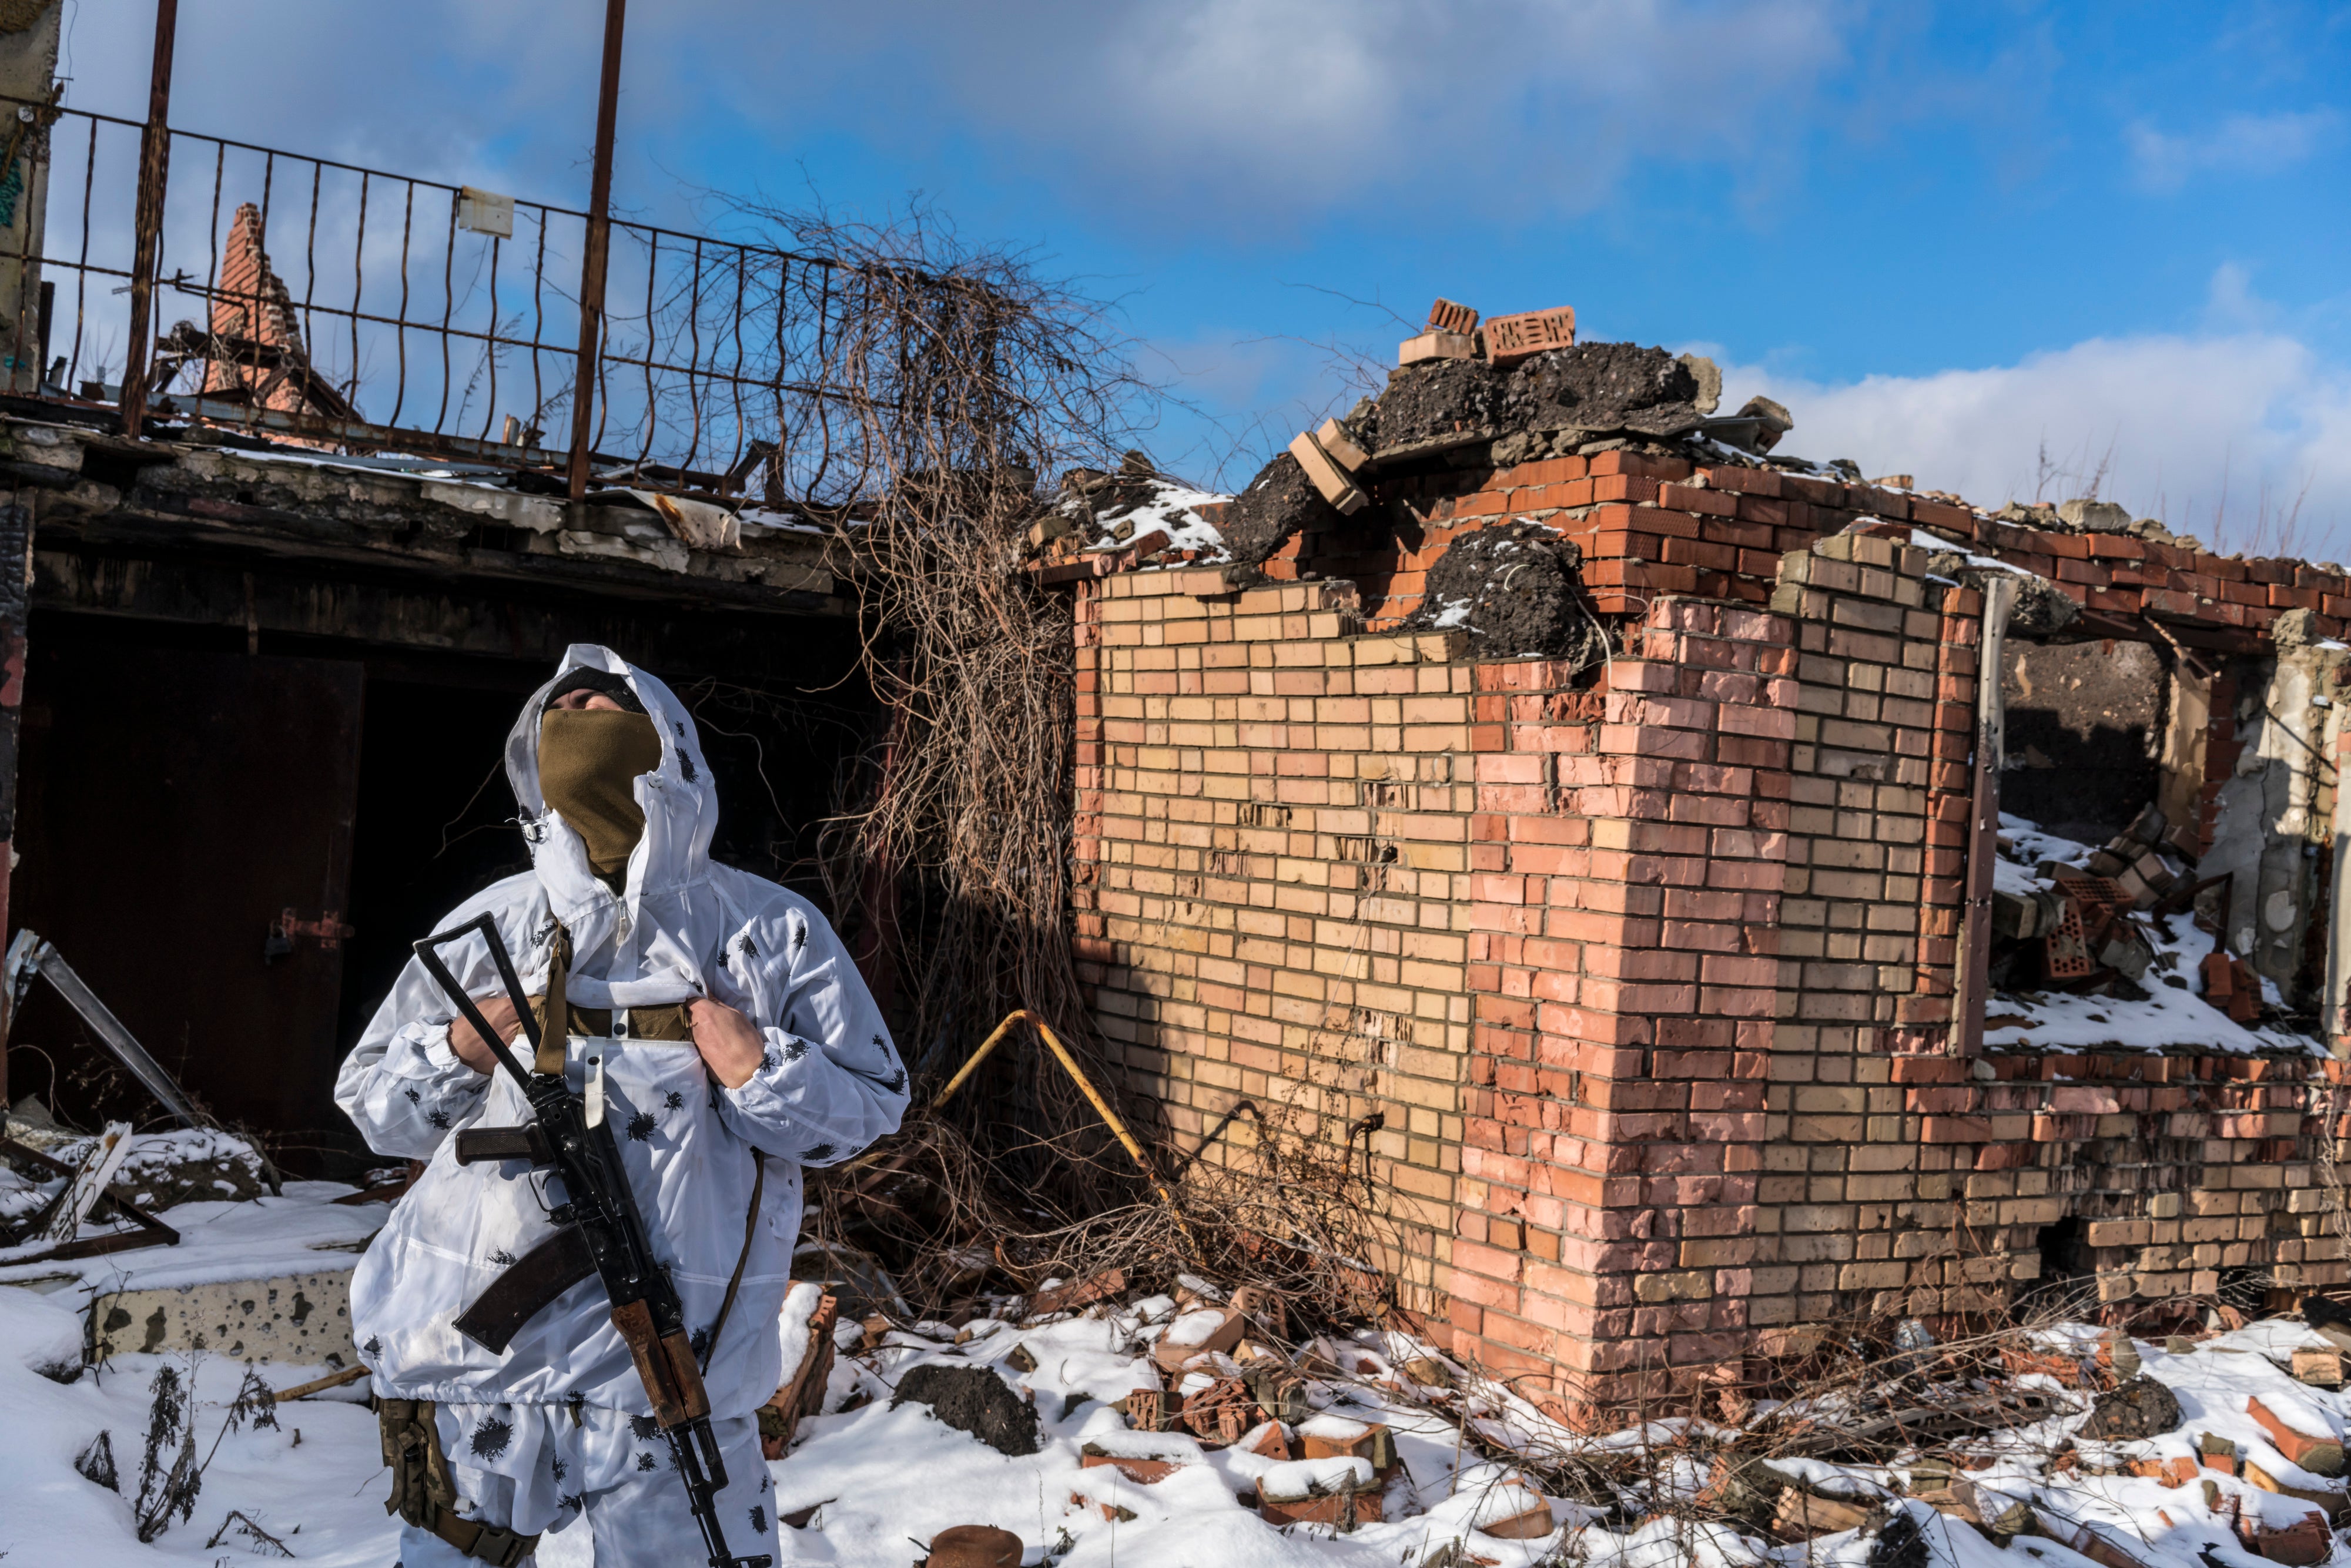 A Ukrainian soldier on the front line in Pisky, Ukraine, on 18 January 2022